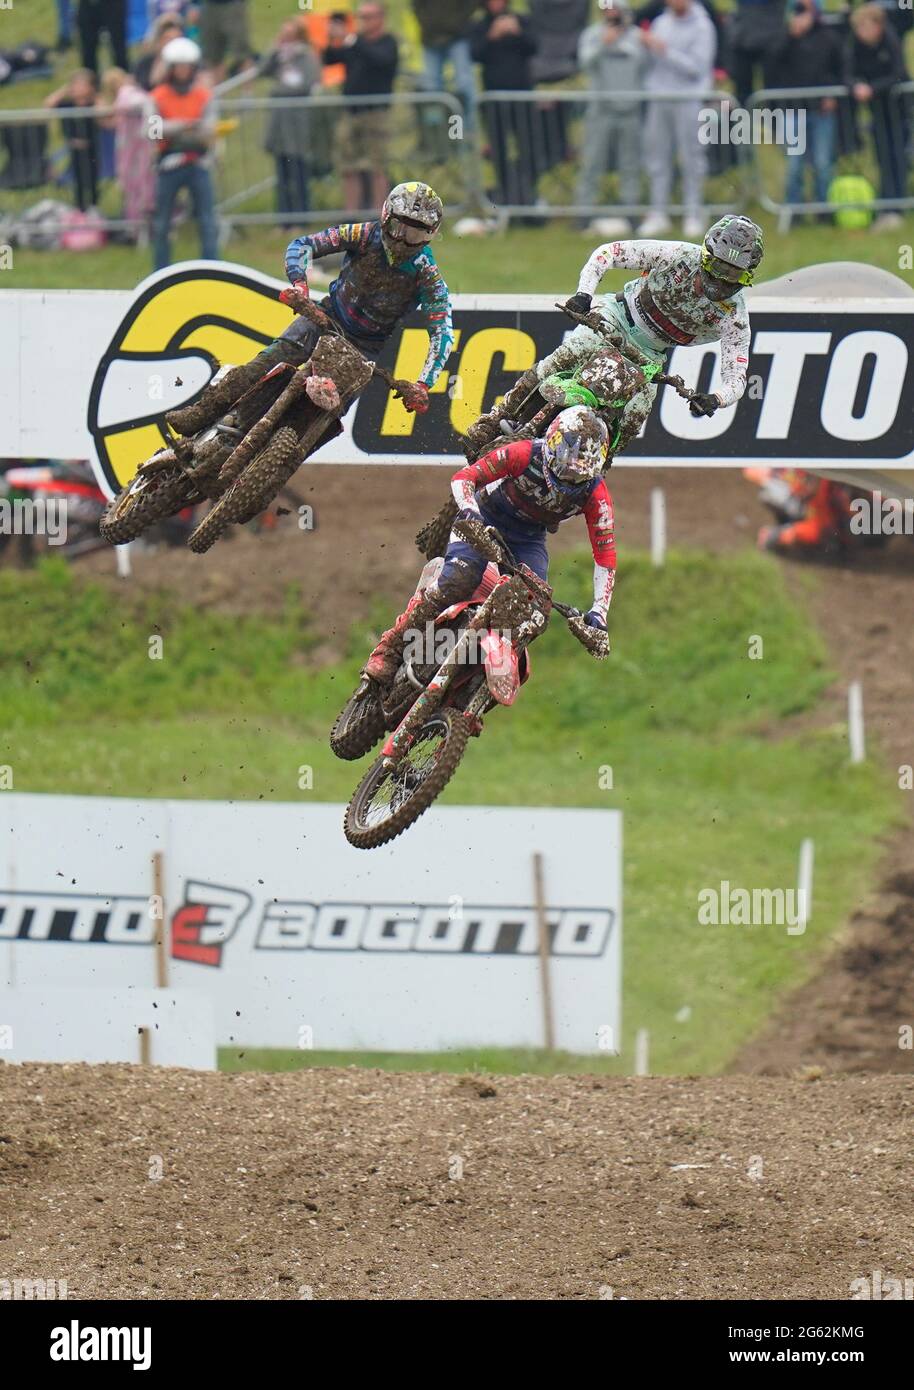 Riders make a jump during MX2 Race 1 in the British leg of the 2021 FIM MotoCross World Championships on Sunday, June 27, 2021, at Matterley Basin, Wi Stock Photo